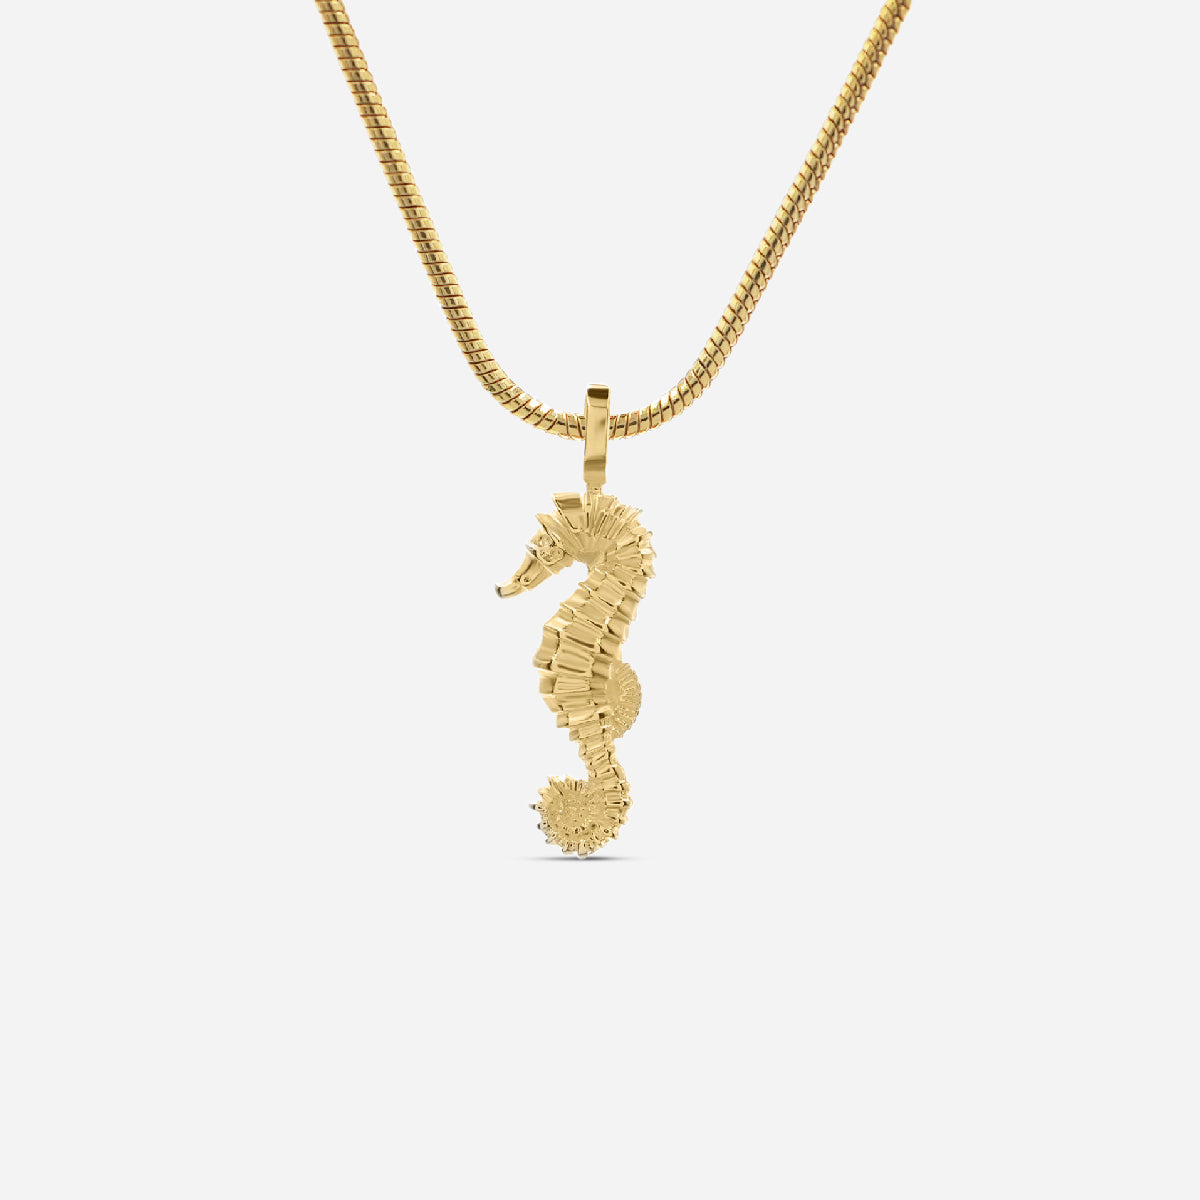 Kids necklace "Seahorse" - gold